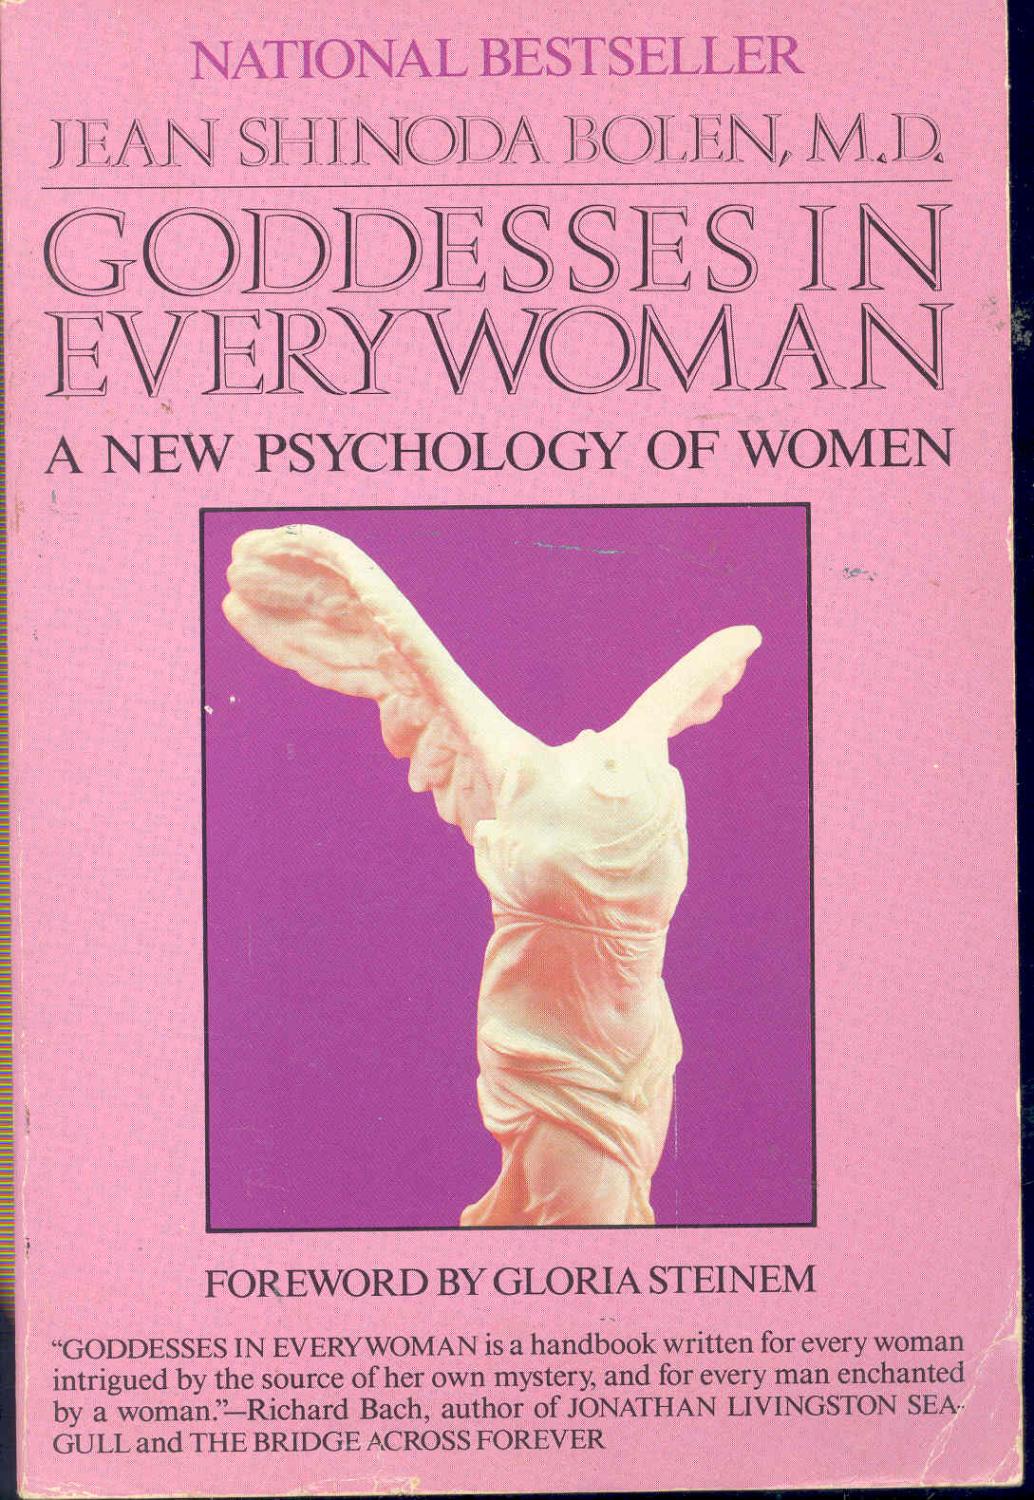 Goddesses in everywoman : a new psychology